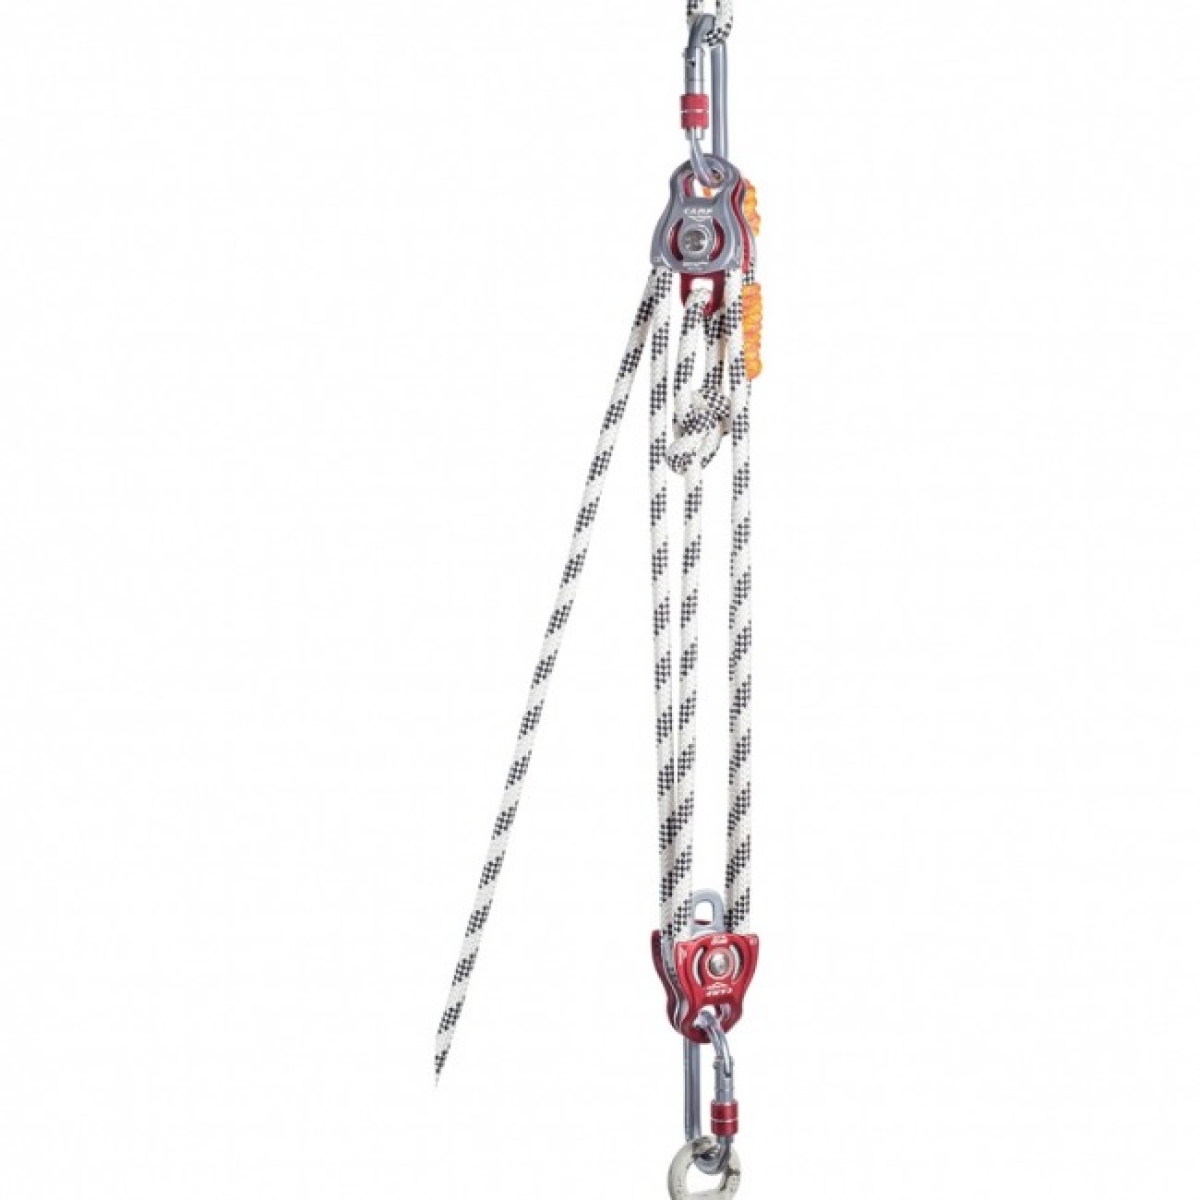 CAMP Safety Dryad Pulley 2156